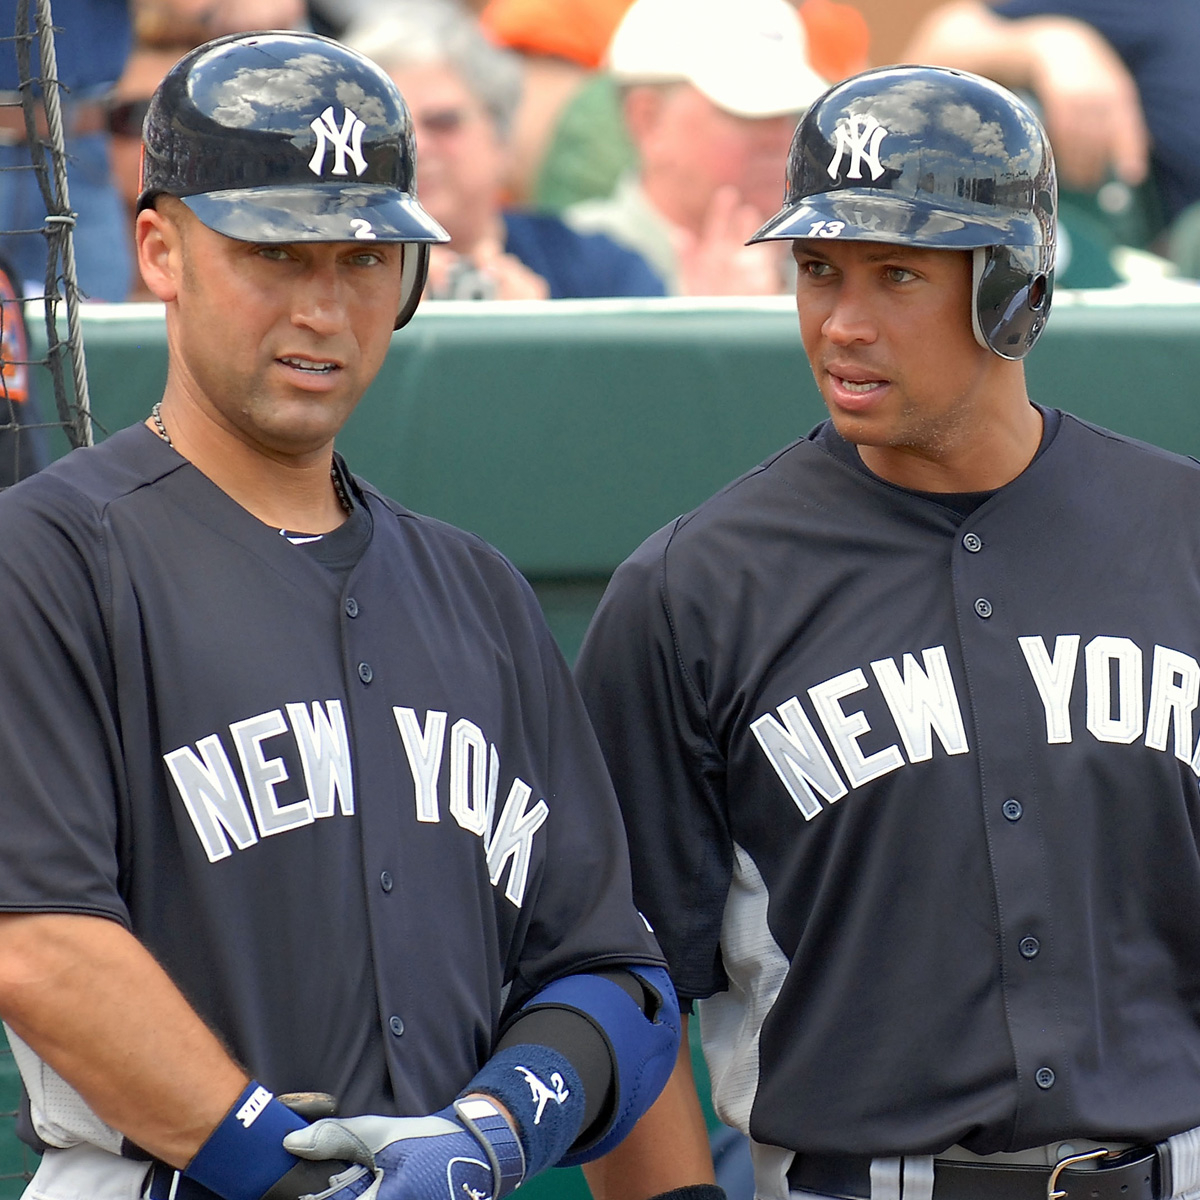 Yankees' Derek Jeter could be whatever you wanted him to be